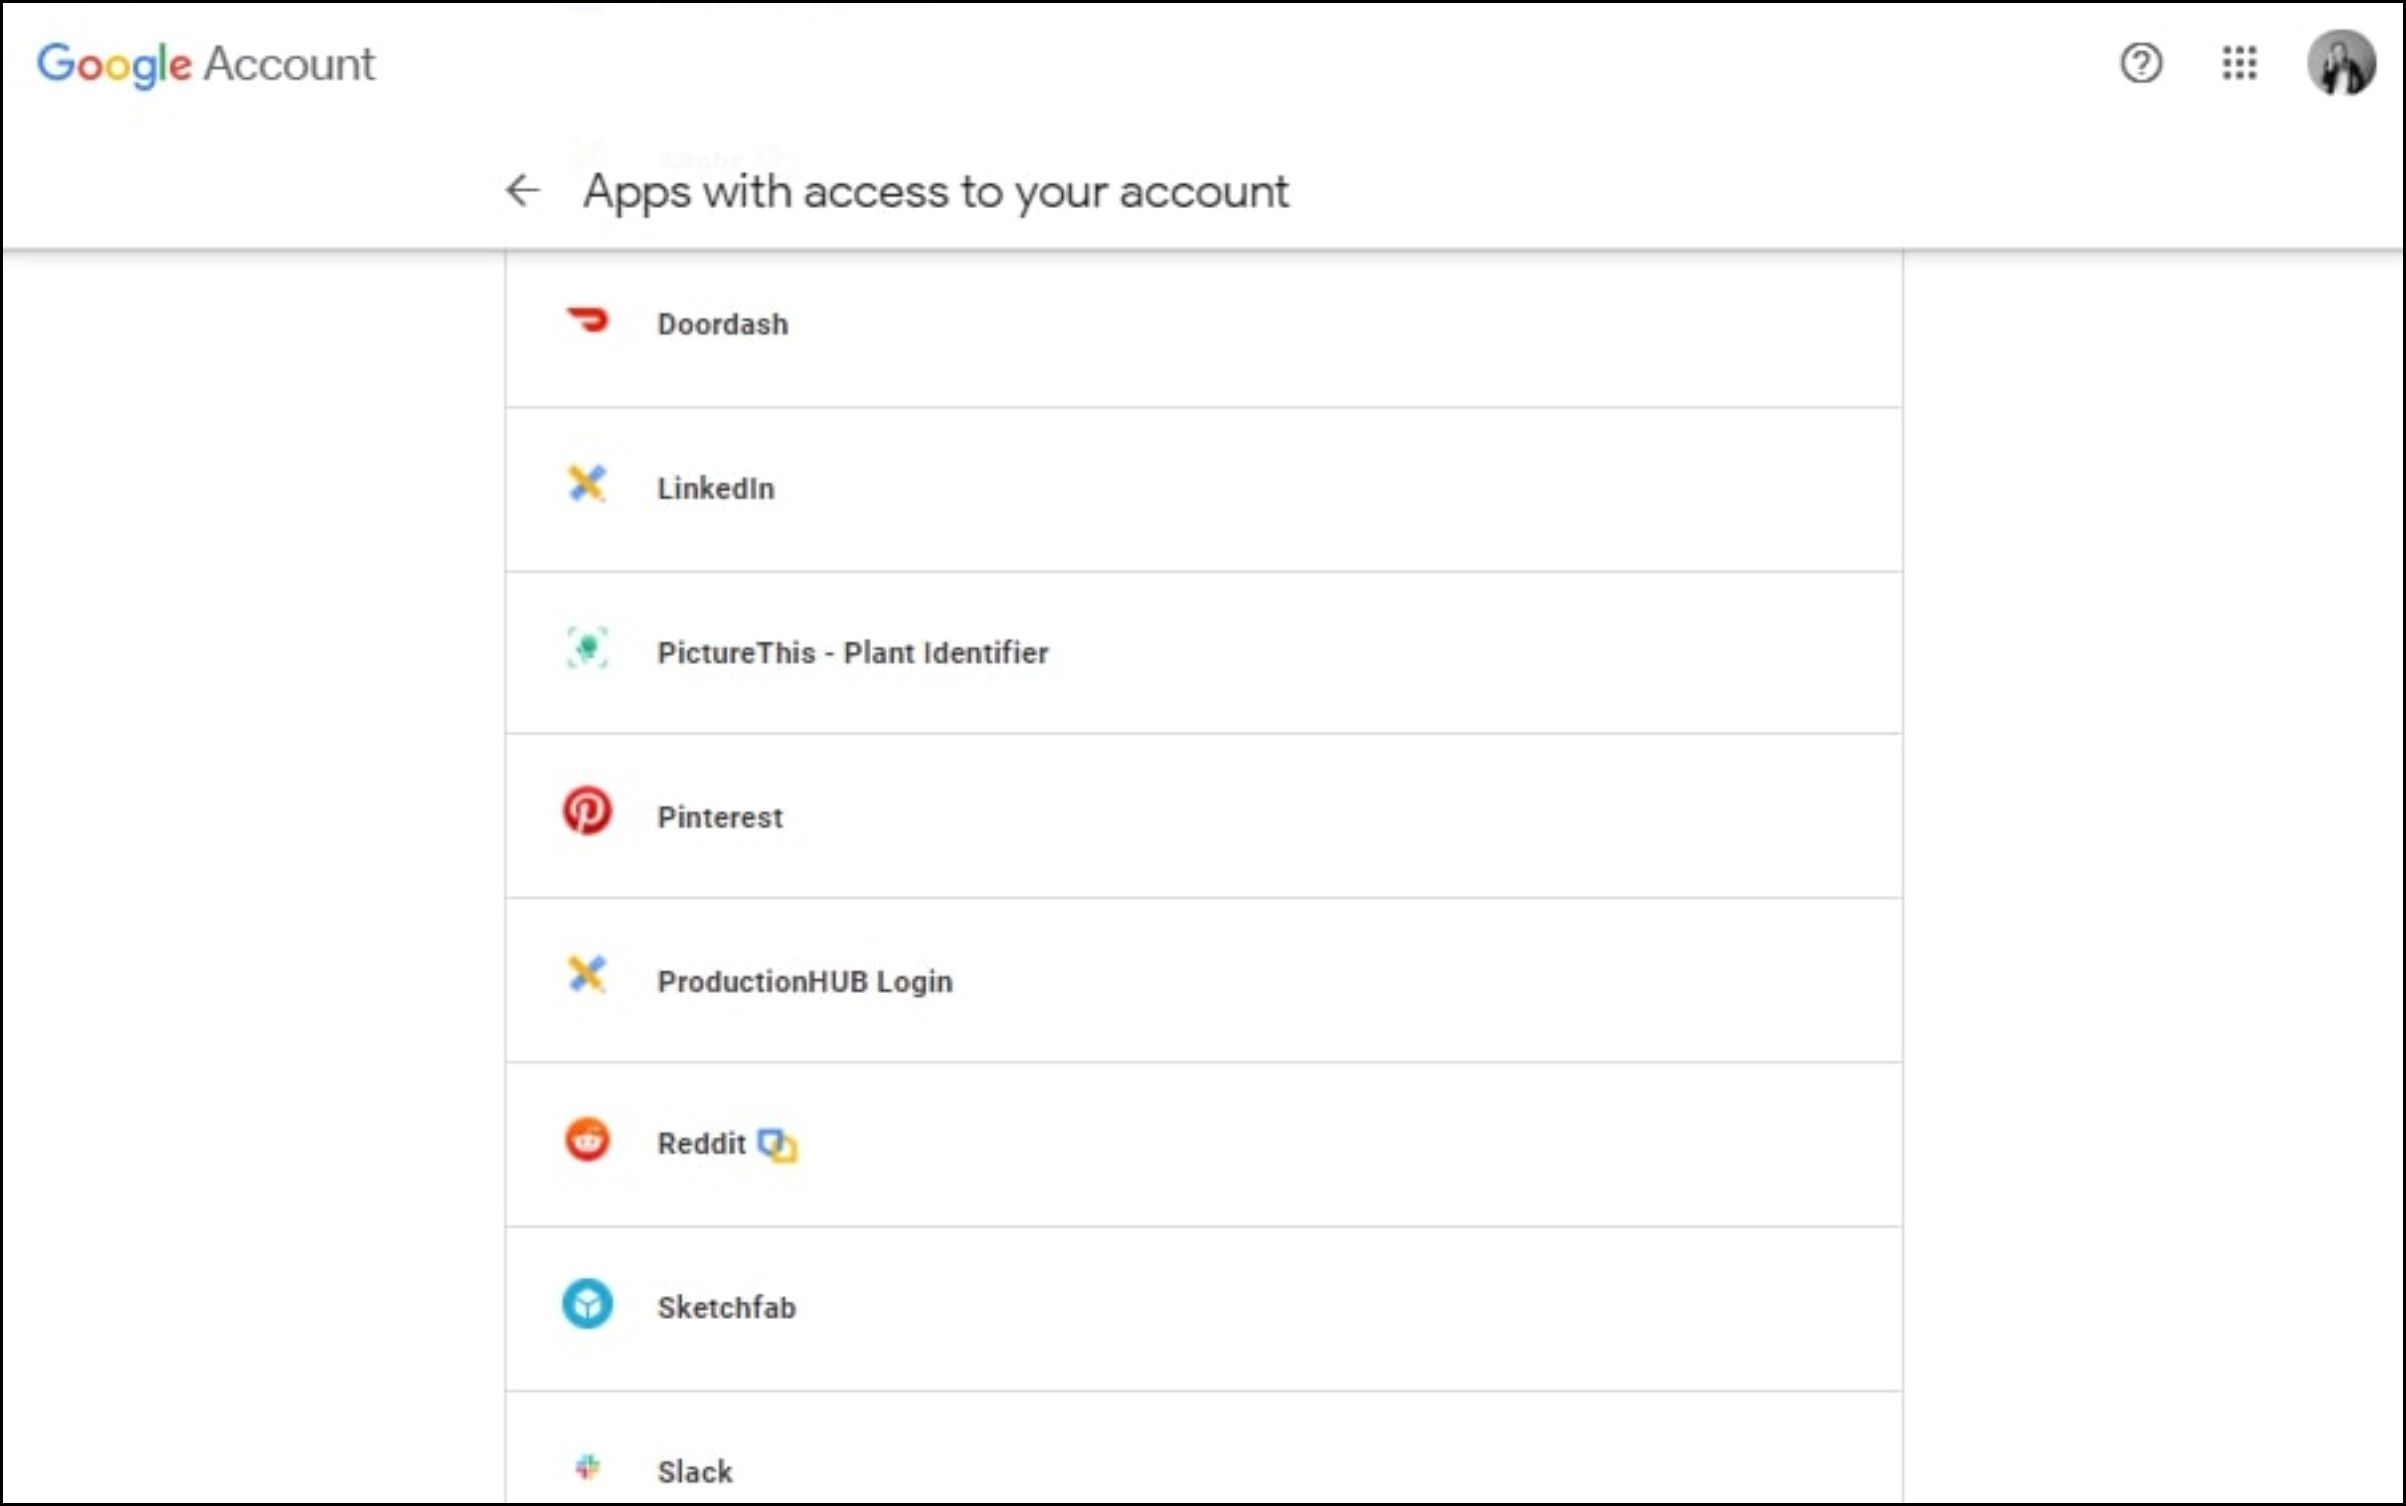 List of apps with access to Google account